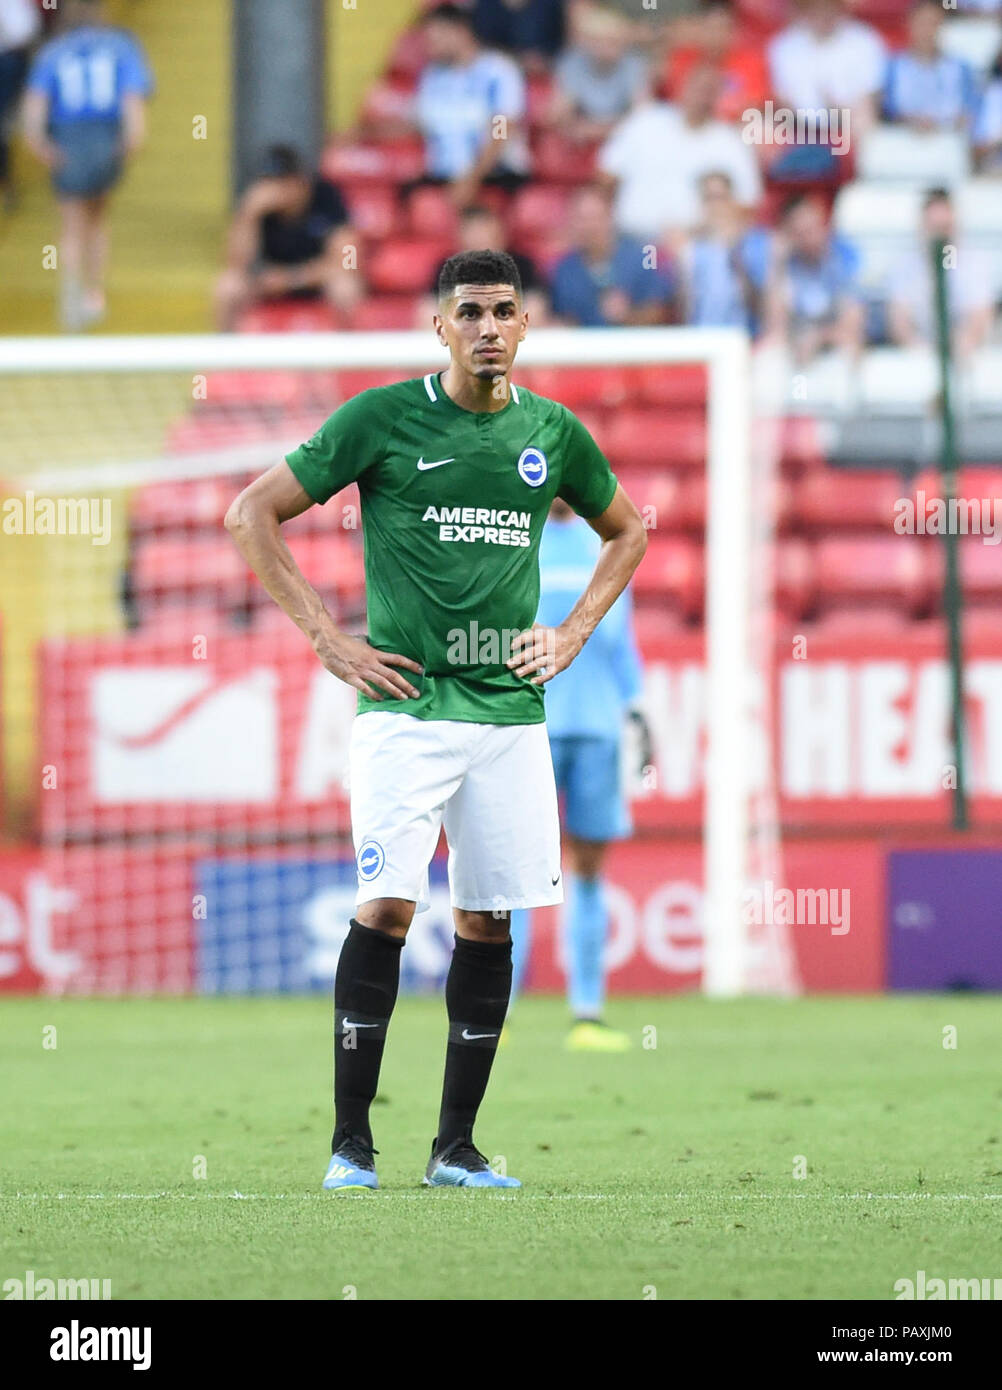 London UK 24th July 2018 - Leon Balogun of Brighton  during the pre season friendly football match between Charlton Athletic and Brighton and Hove Albion  at The Valley stadium  Editorial Use Only Stock Photo